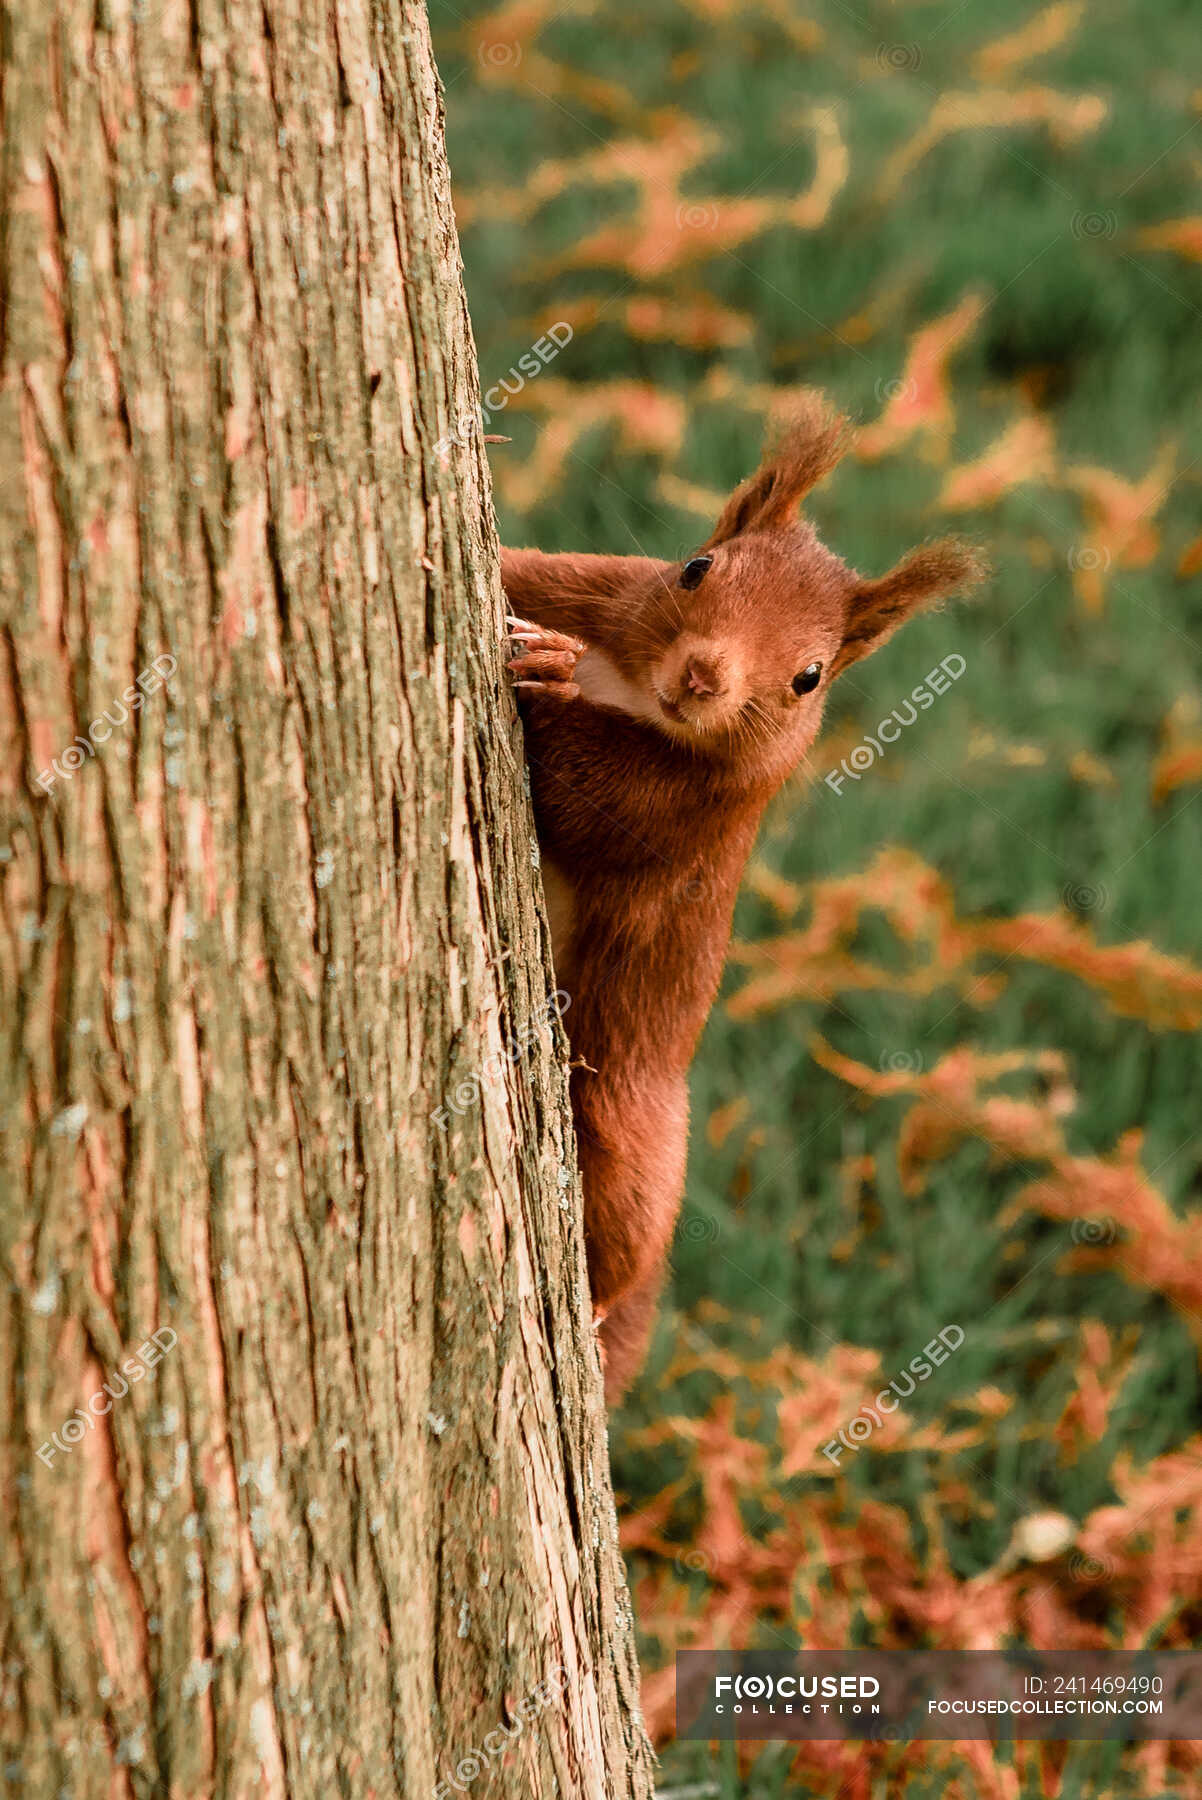 Funny squirrel on tree in park — furry, looking at camera - Stock Photo |  #241469490